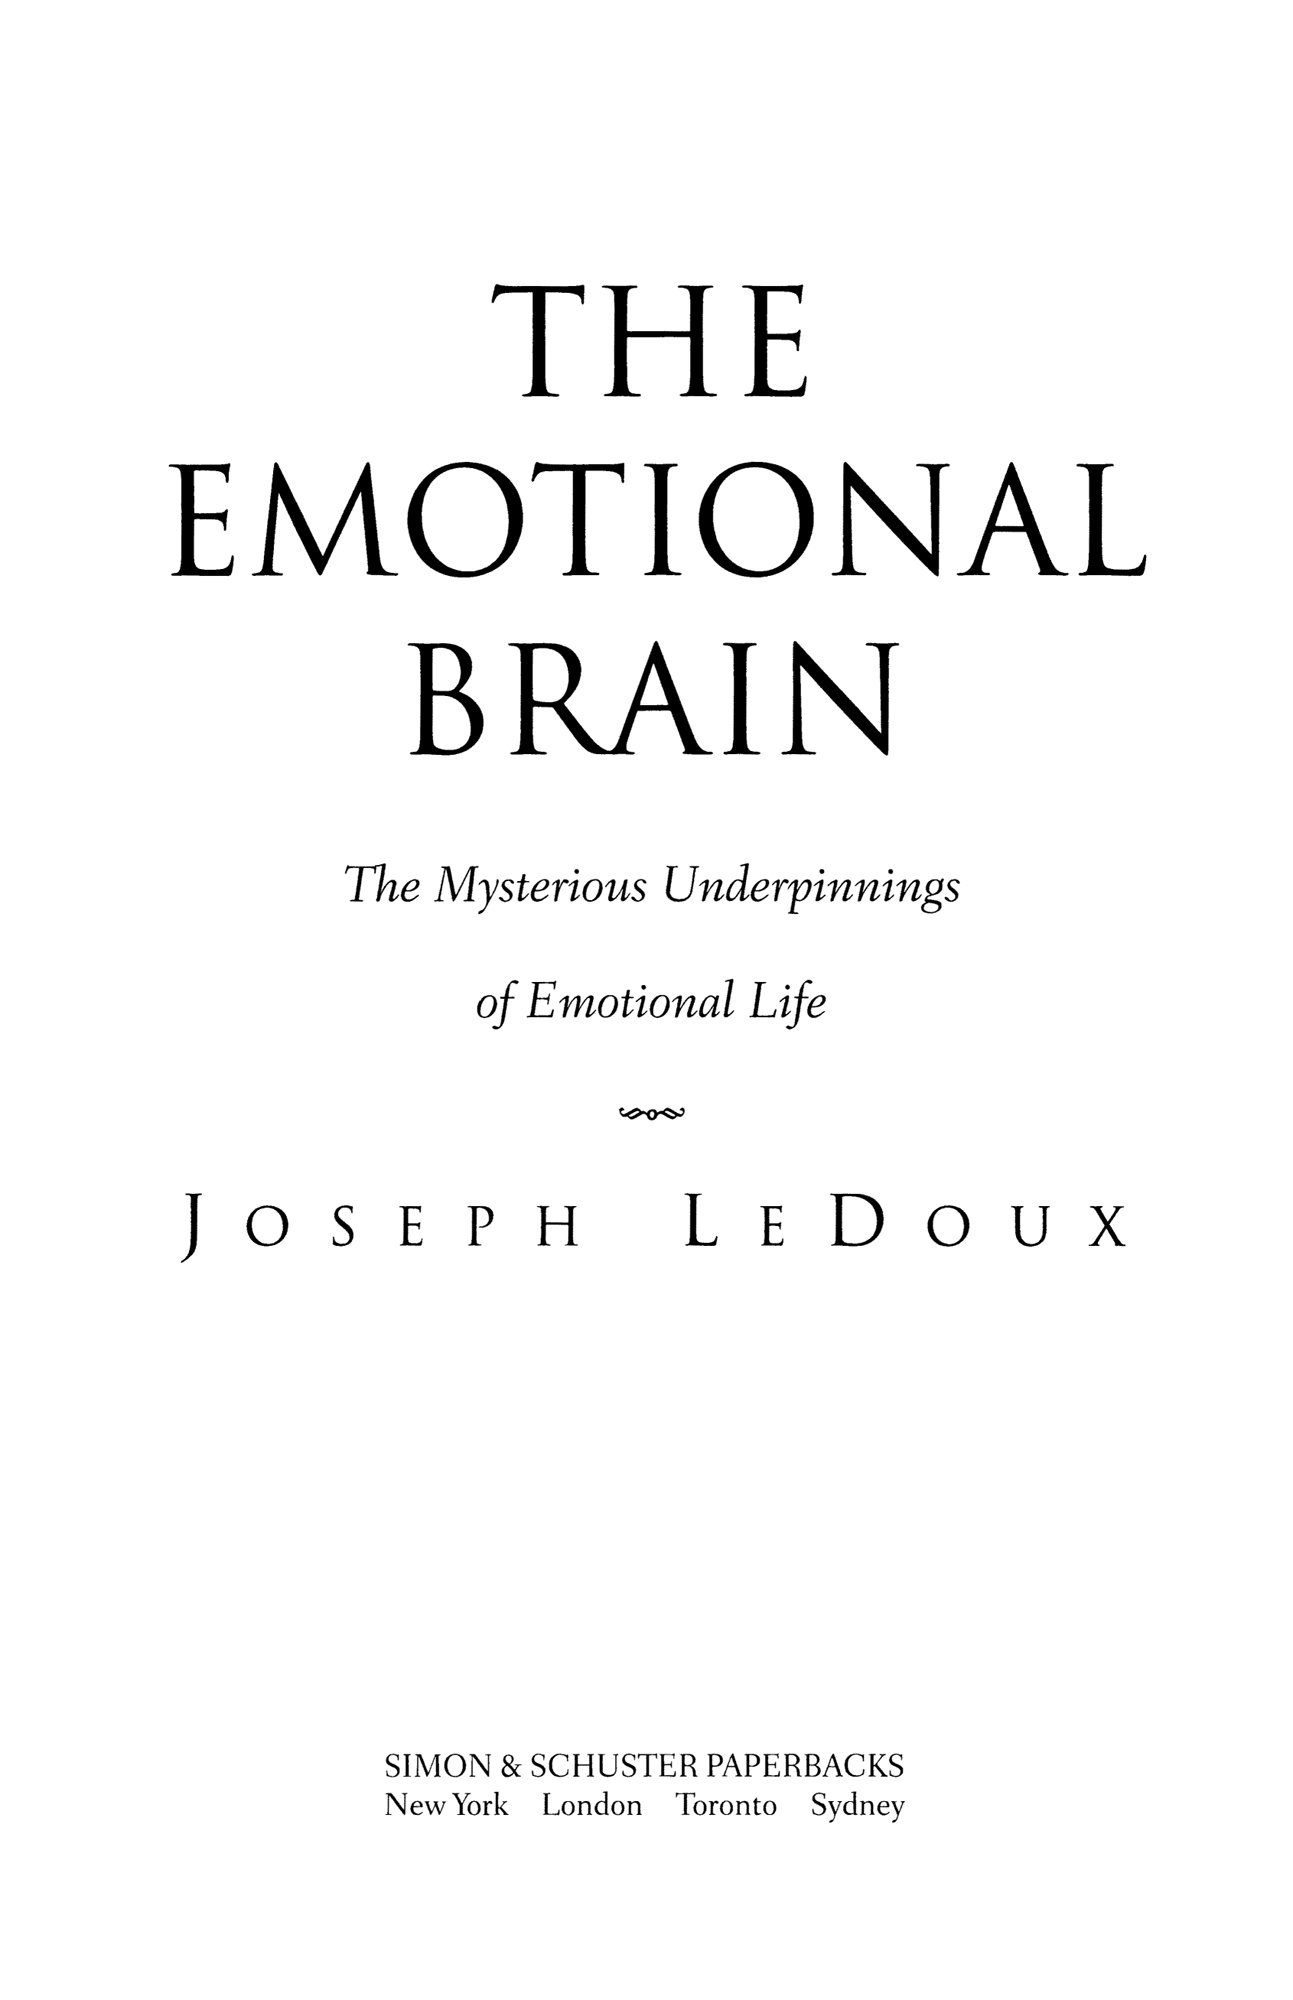 Download The Emotional Brain The Mysterious Underpinnings of Emotional